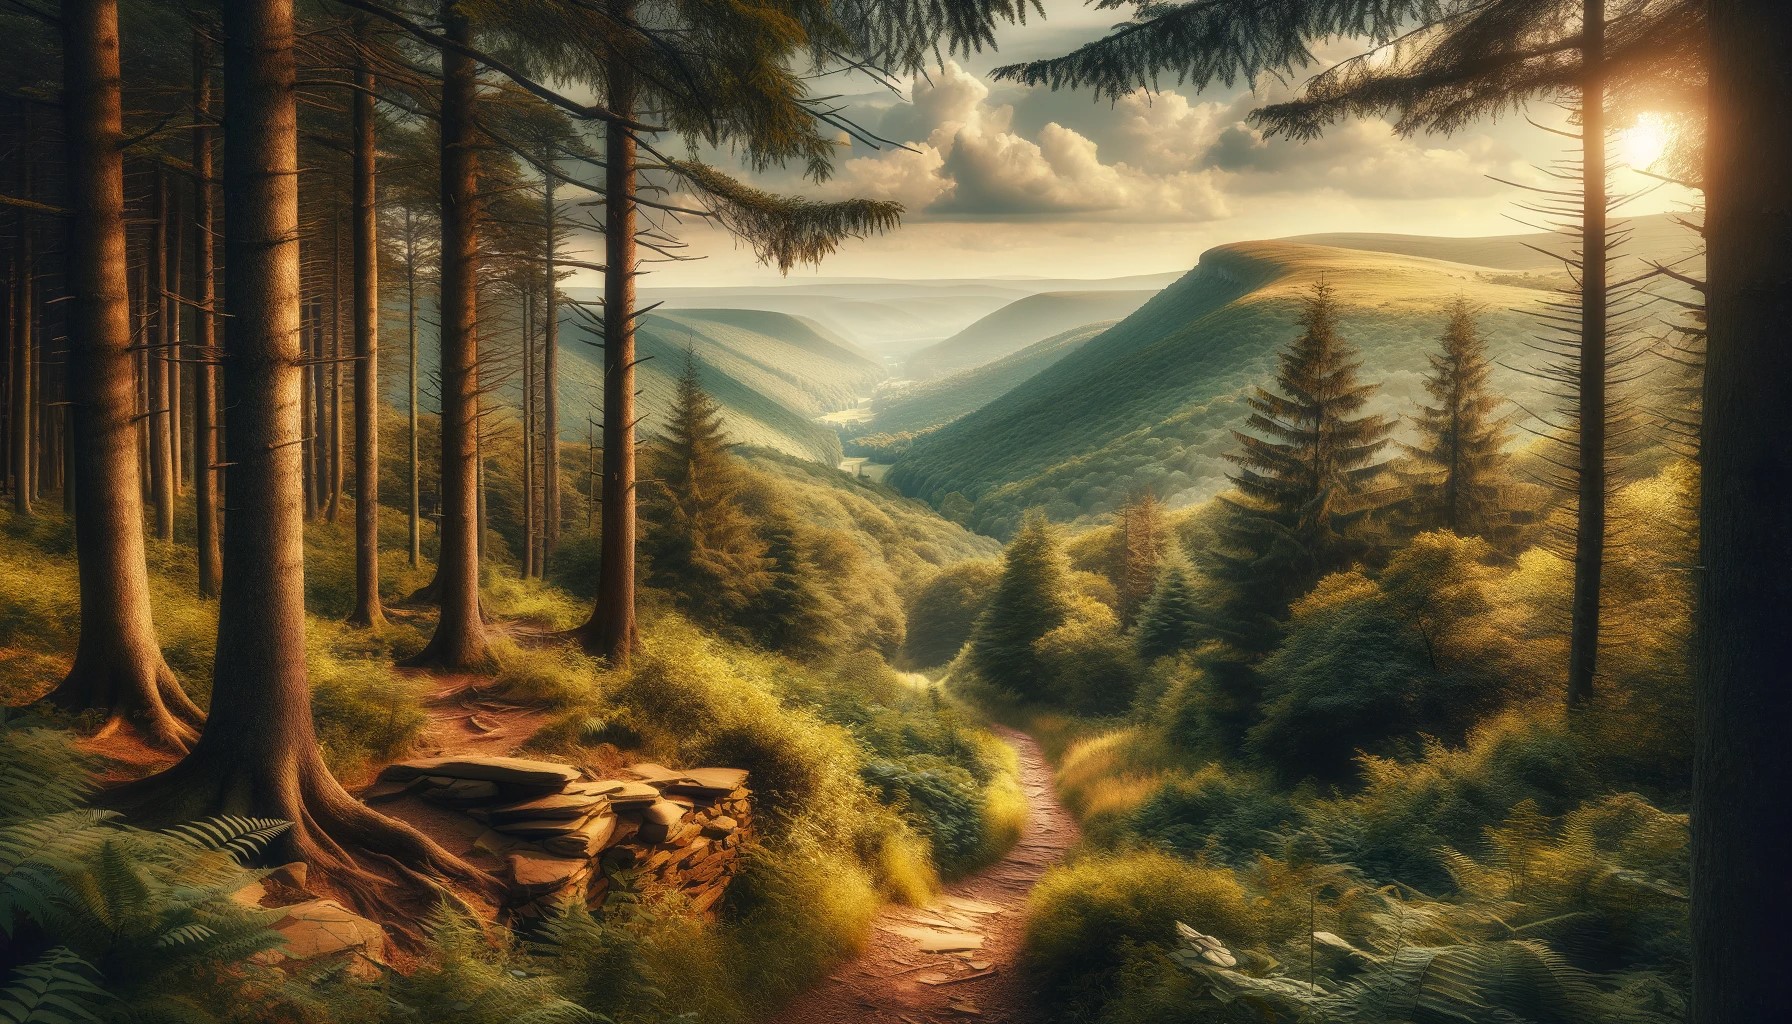 A picturesque view of the Allegheny Mountains, capturing the essence of hiking in this region. The image features a rustic hiking trail meandering through